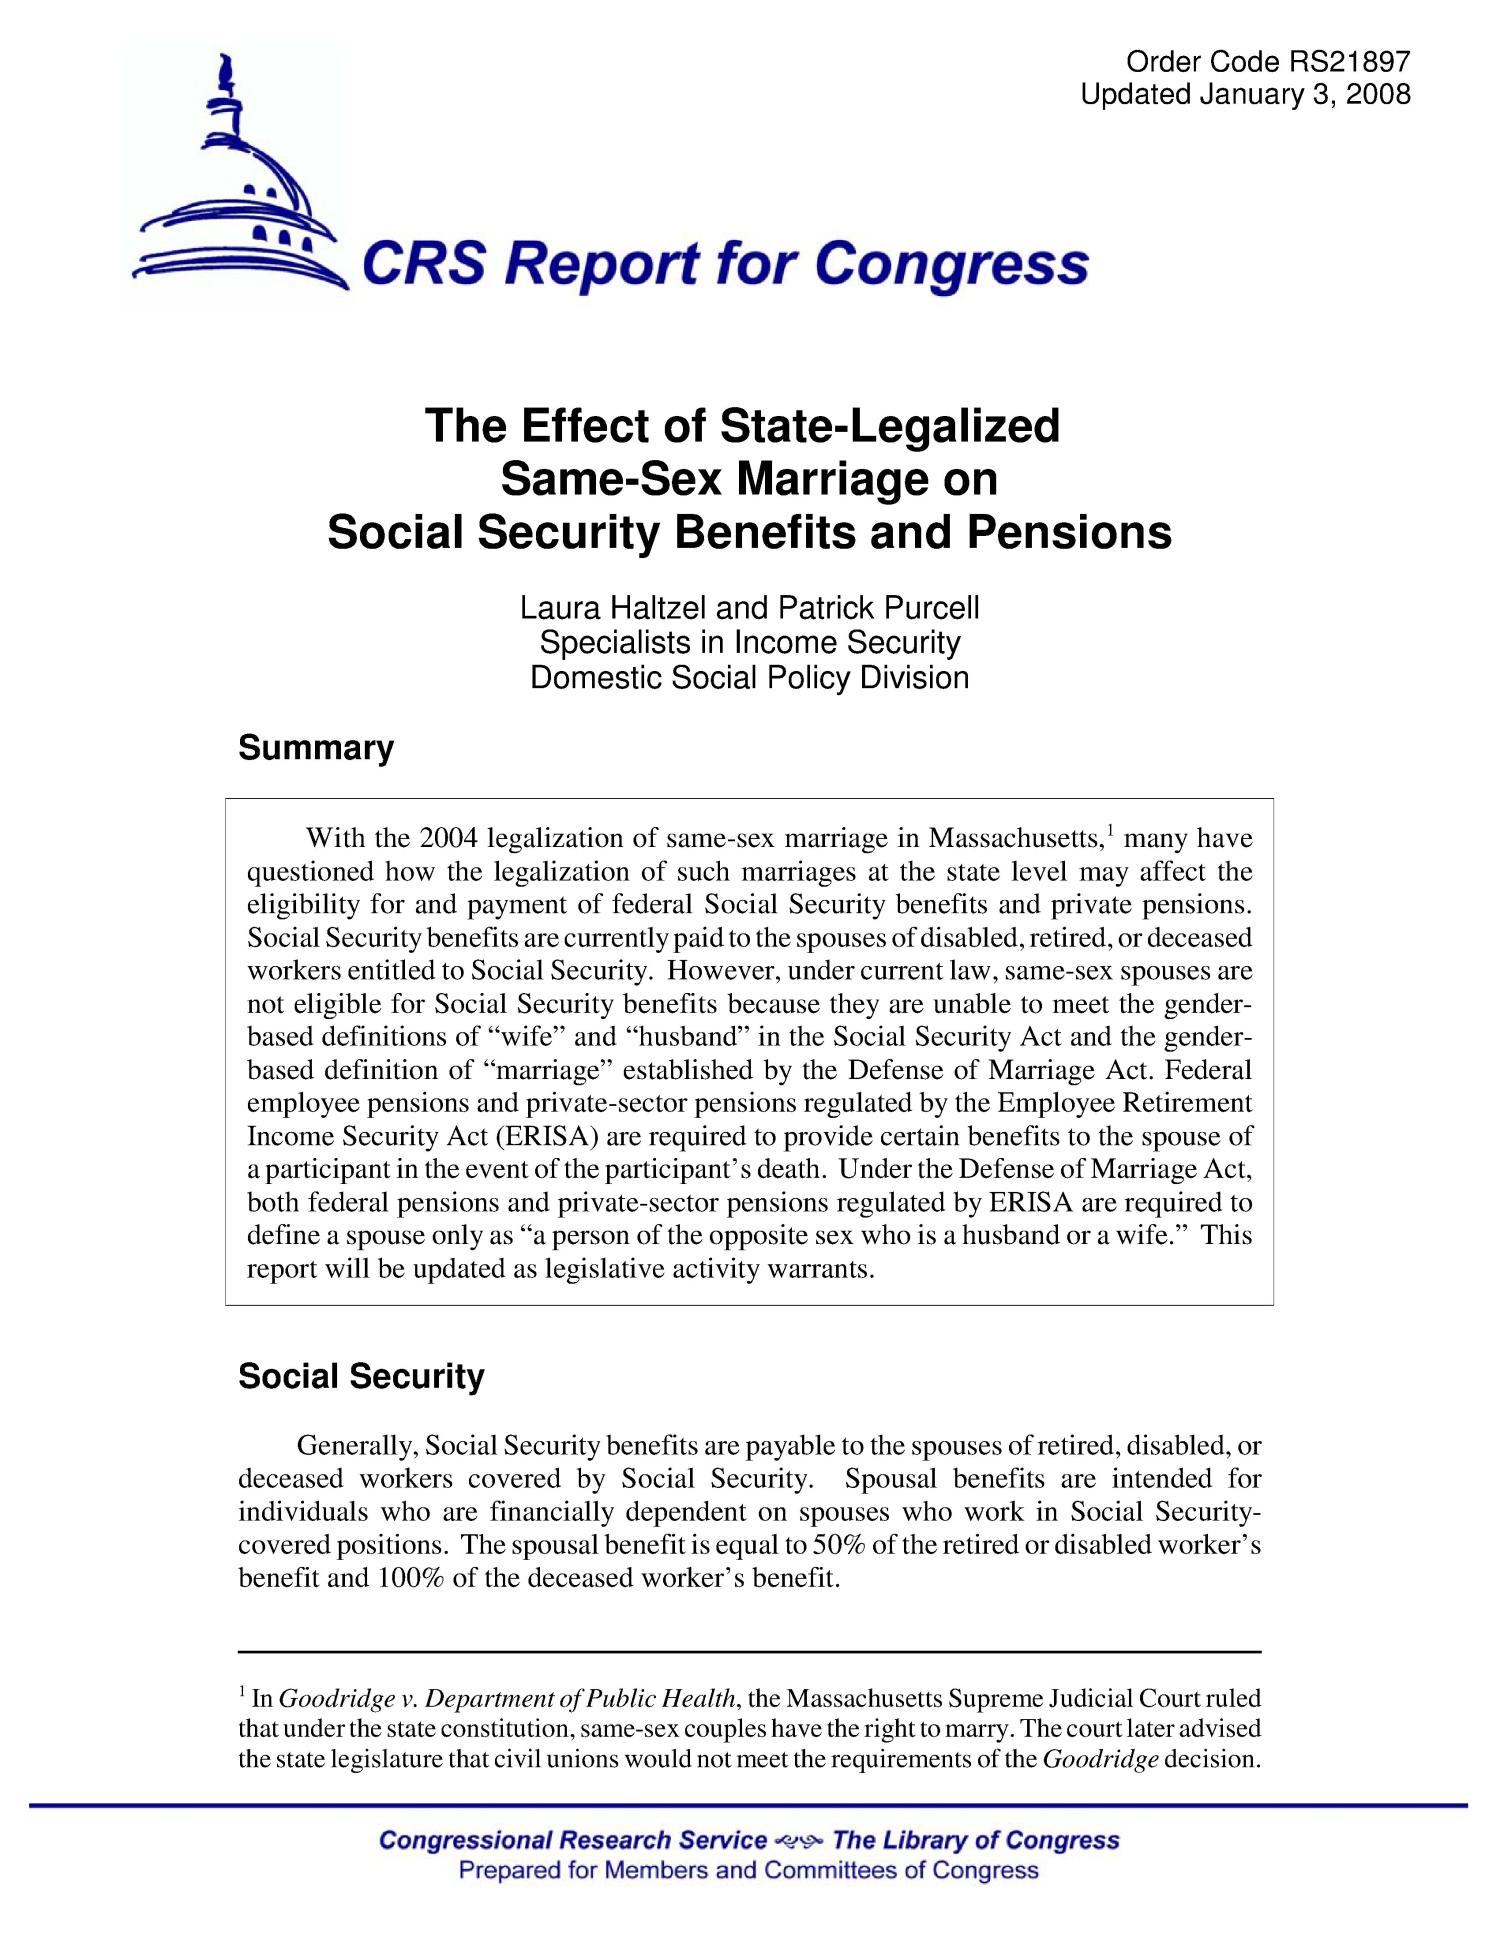 The Effect Of State Legalized Same Sex Marriage On Social Security Benefits And Pensions Unt 